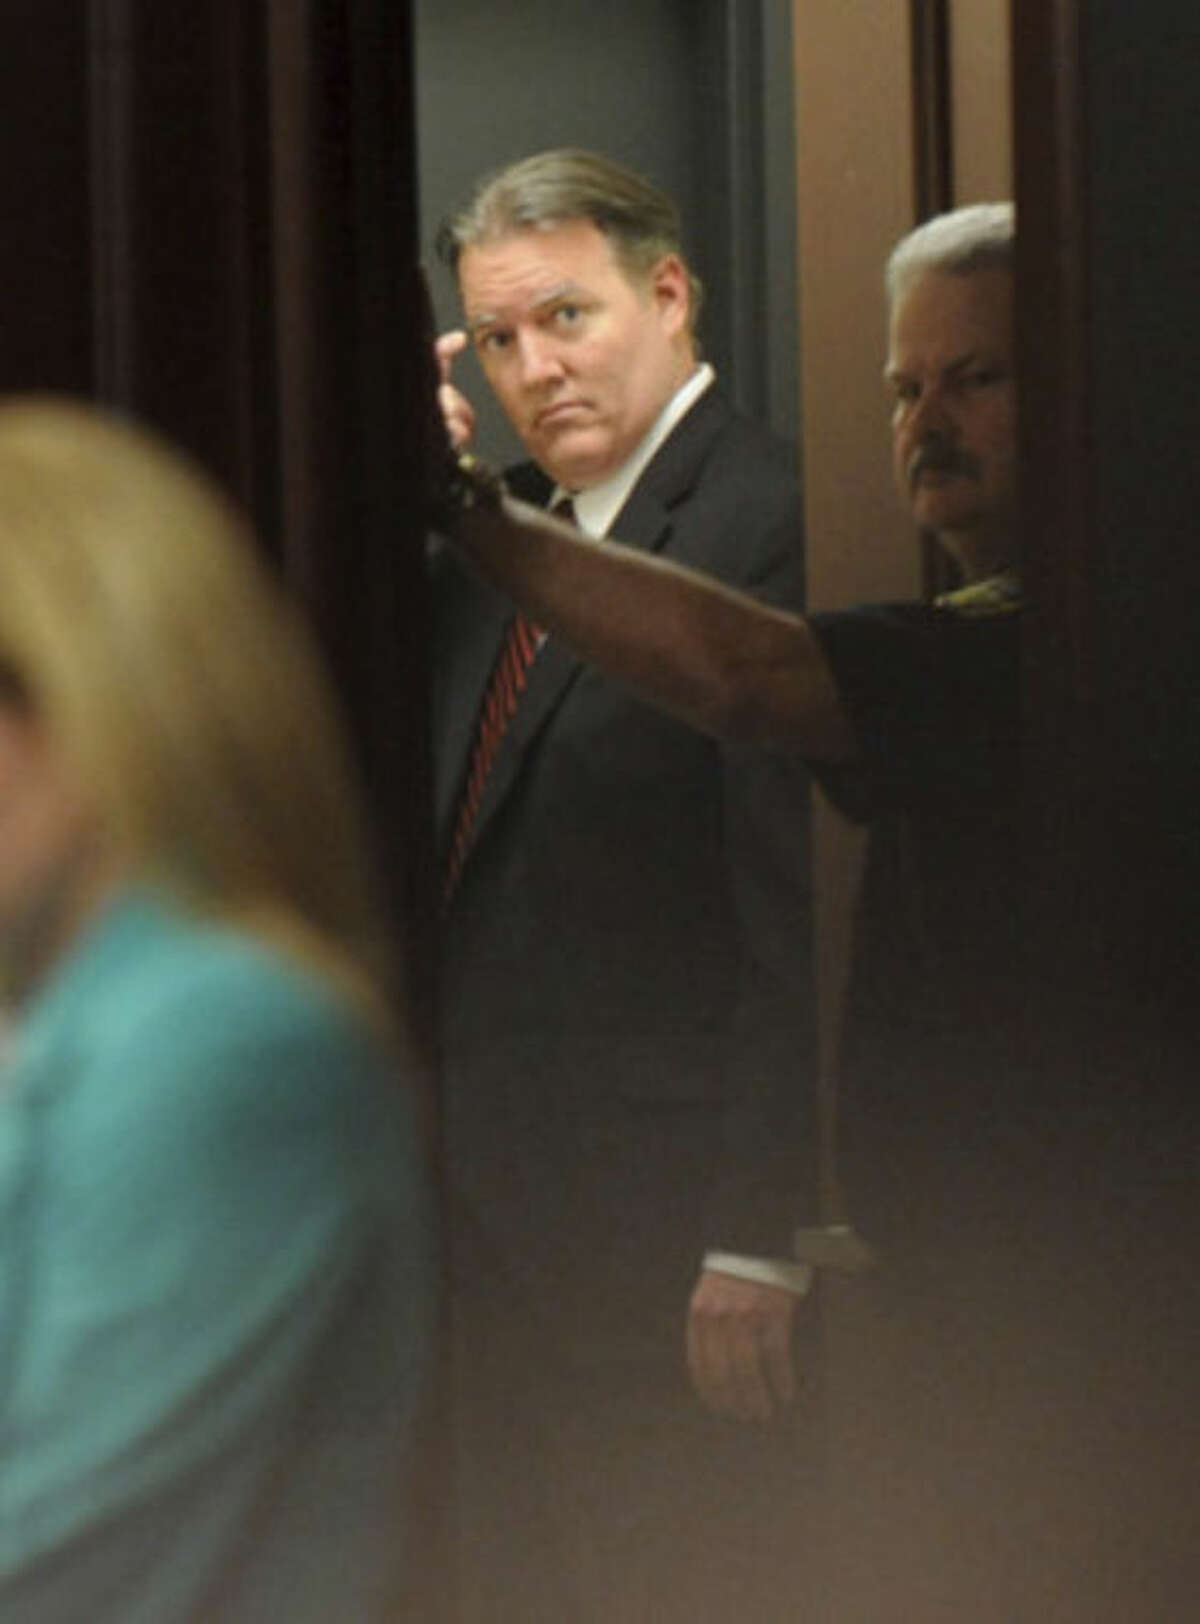 Michael Dunn leaves the courtroom after the verdict is read in Jacksonville, Fla. Saturday, Feb. 15, 2014. Dunn was convicted of attempted murder in the shooting death of a teenager during an argument over loud music, but jurors could not agree on the most serious charge of first-degree murder. (The Florida Times-Union, Bob Mack, Pool)